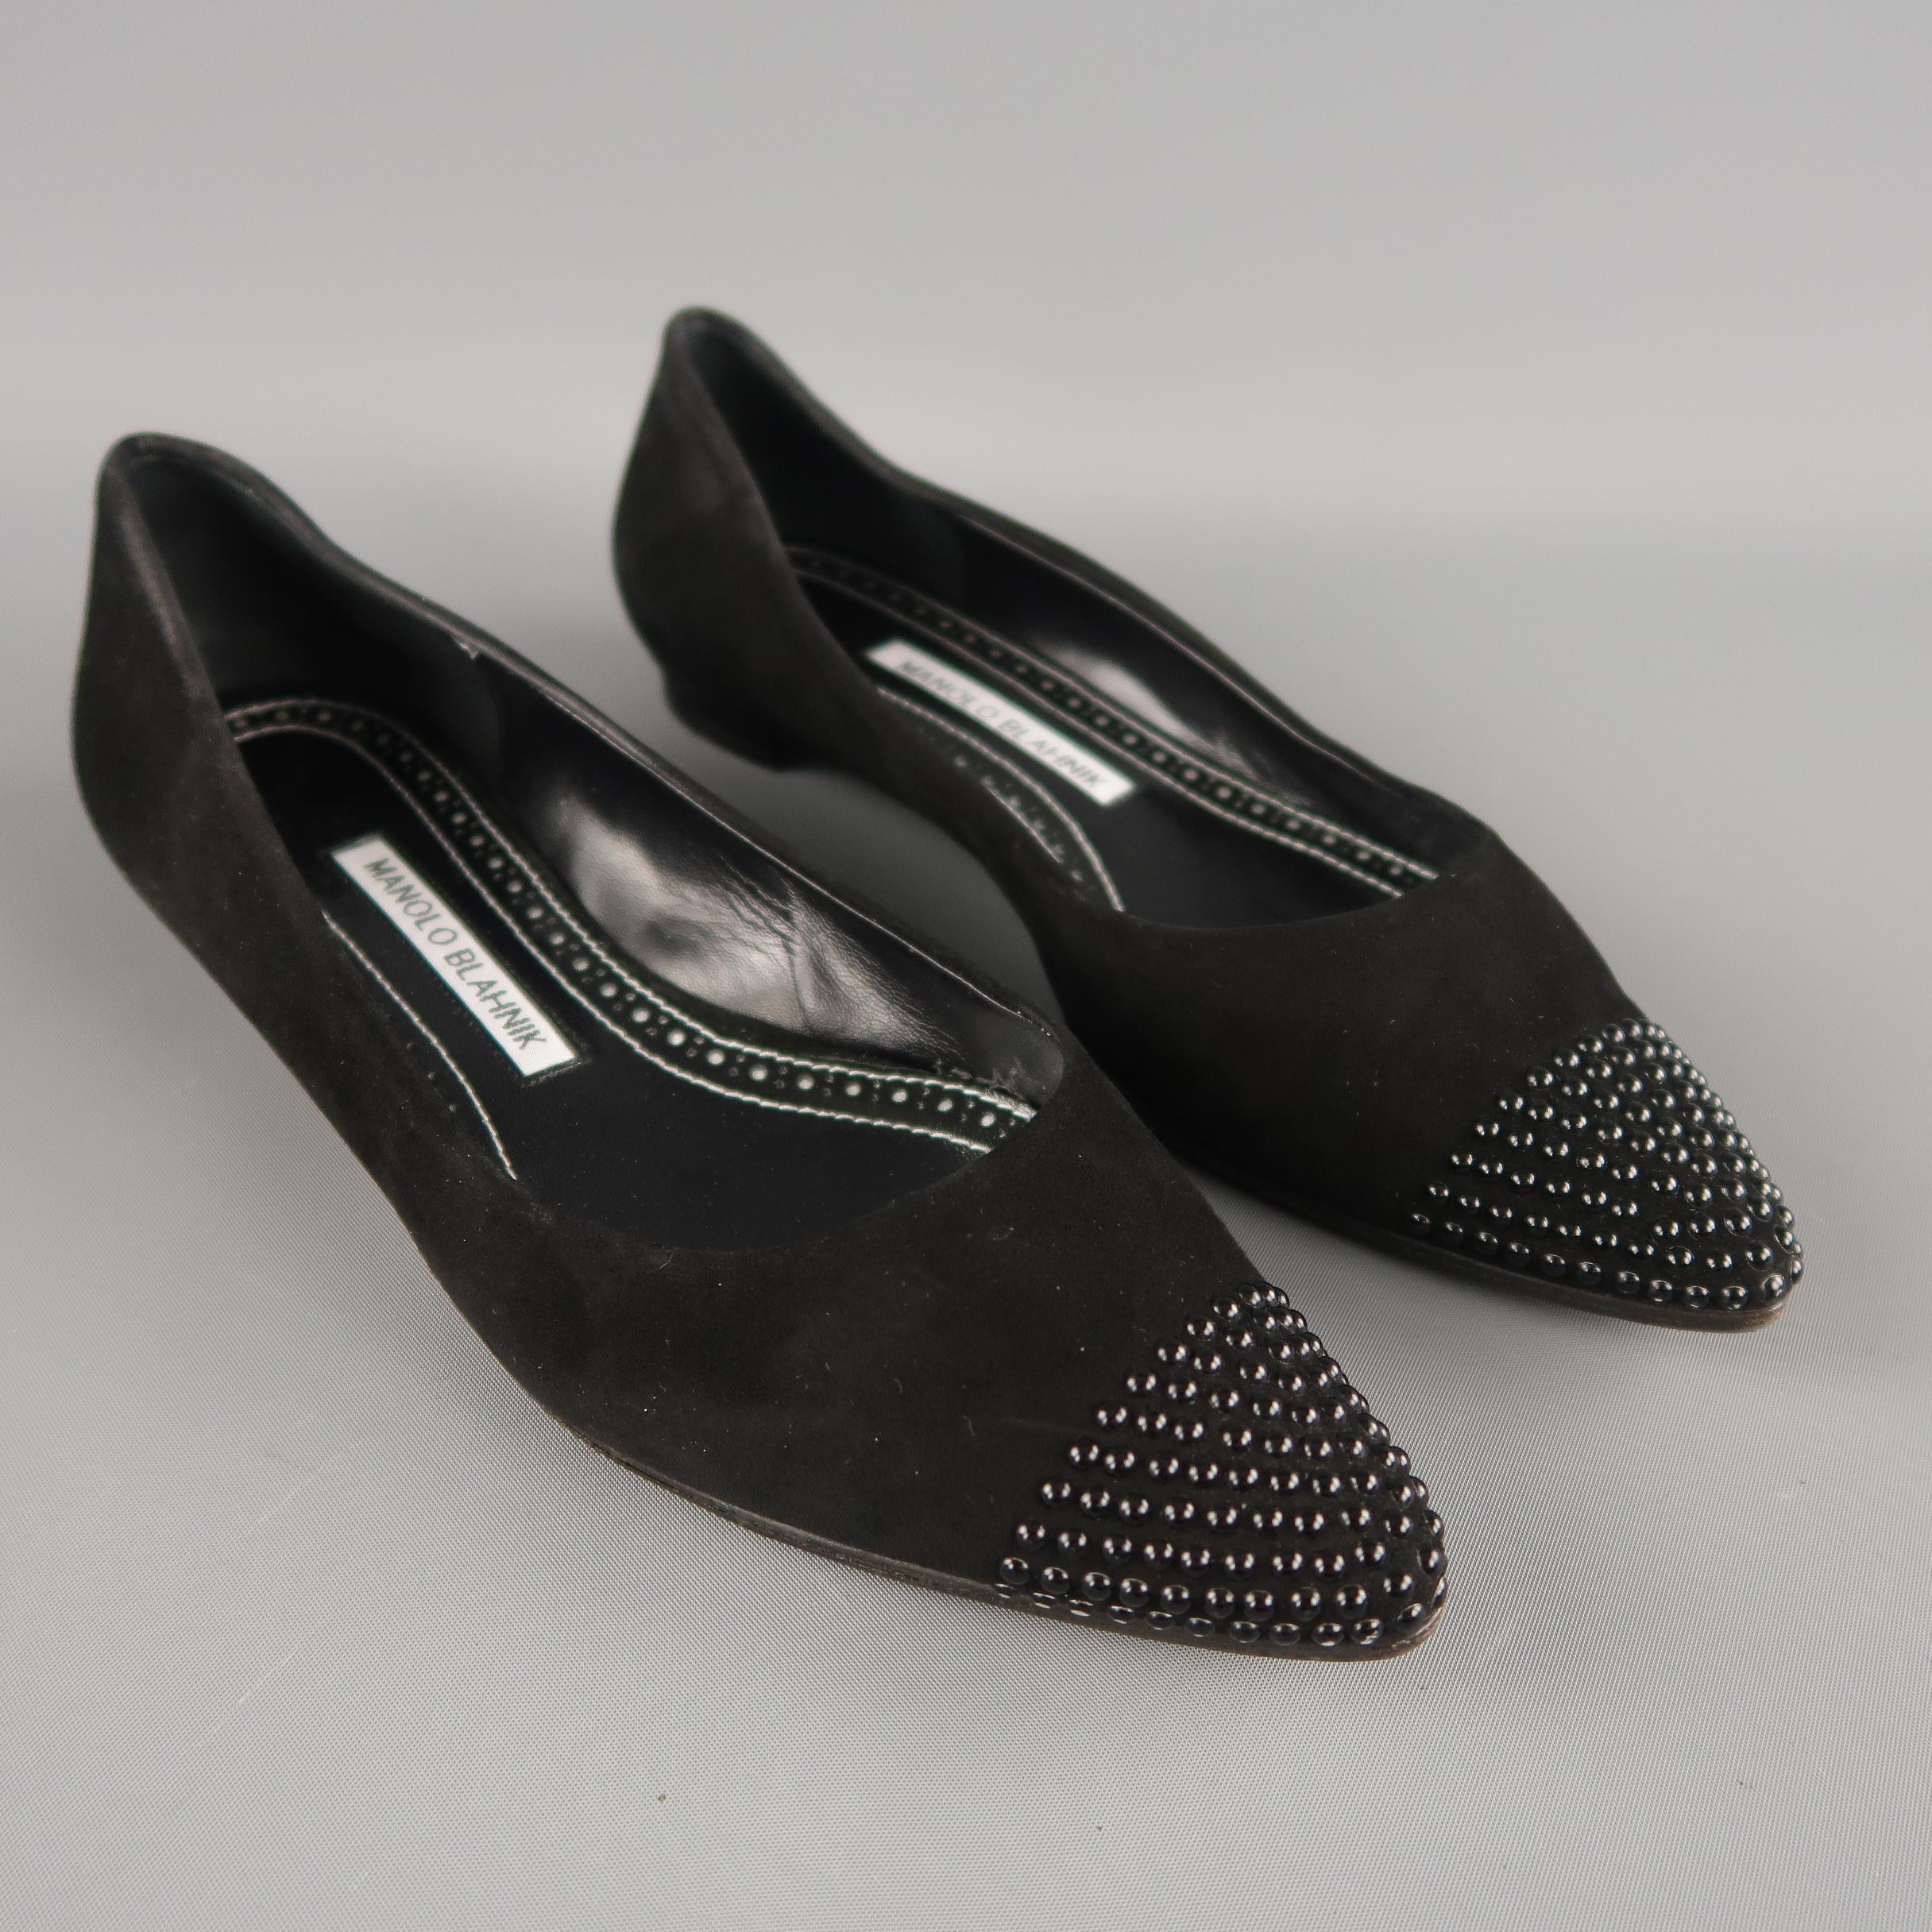 MANOLO BLAHNIK flats come in black suede with a pointed toe studded with a toe cap detail. Made in Italy.
 
Excellent Pre-Owned Condition. Retails: $645.00.
Marked: IT 36.5